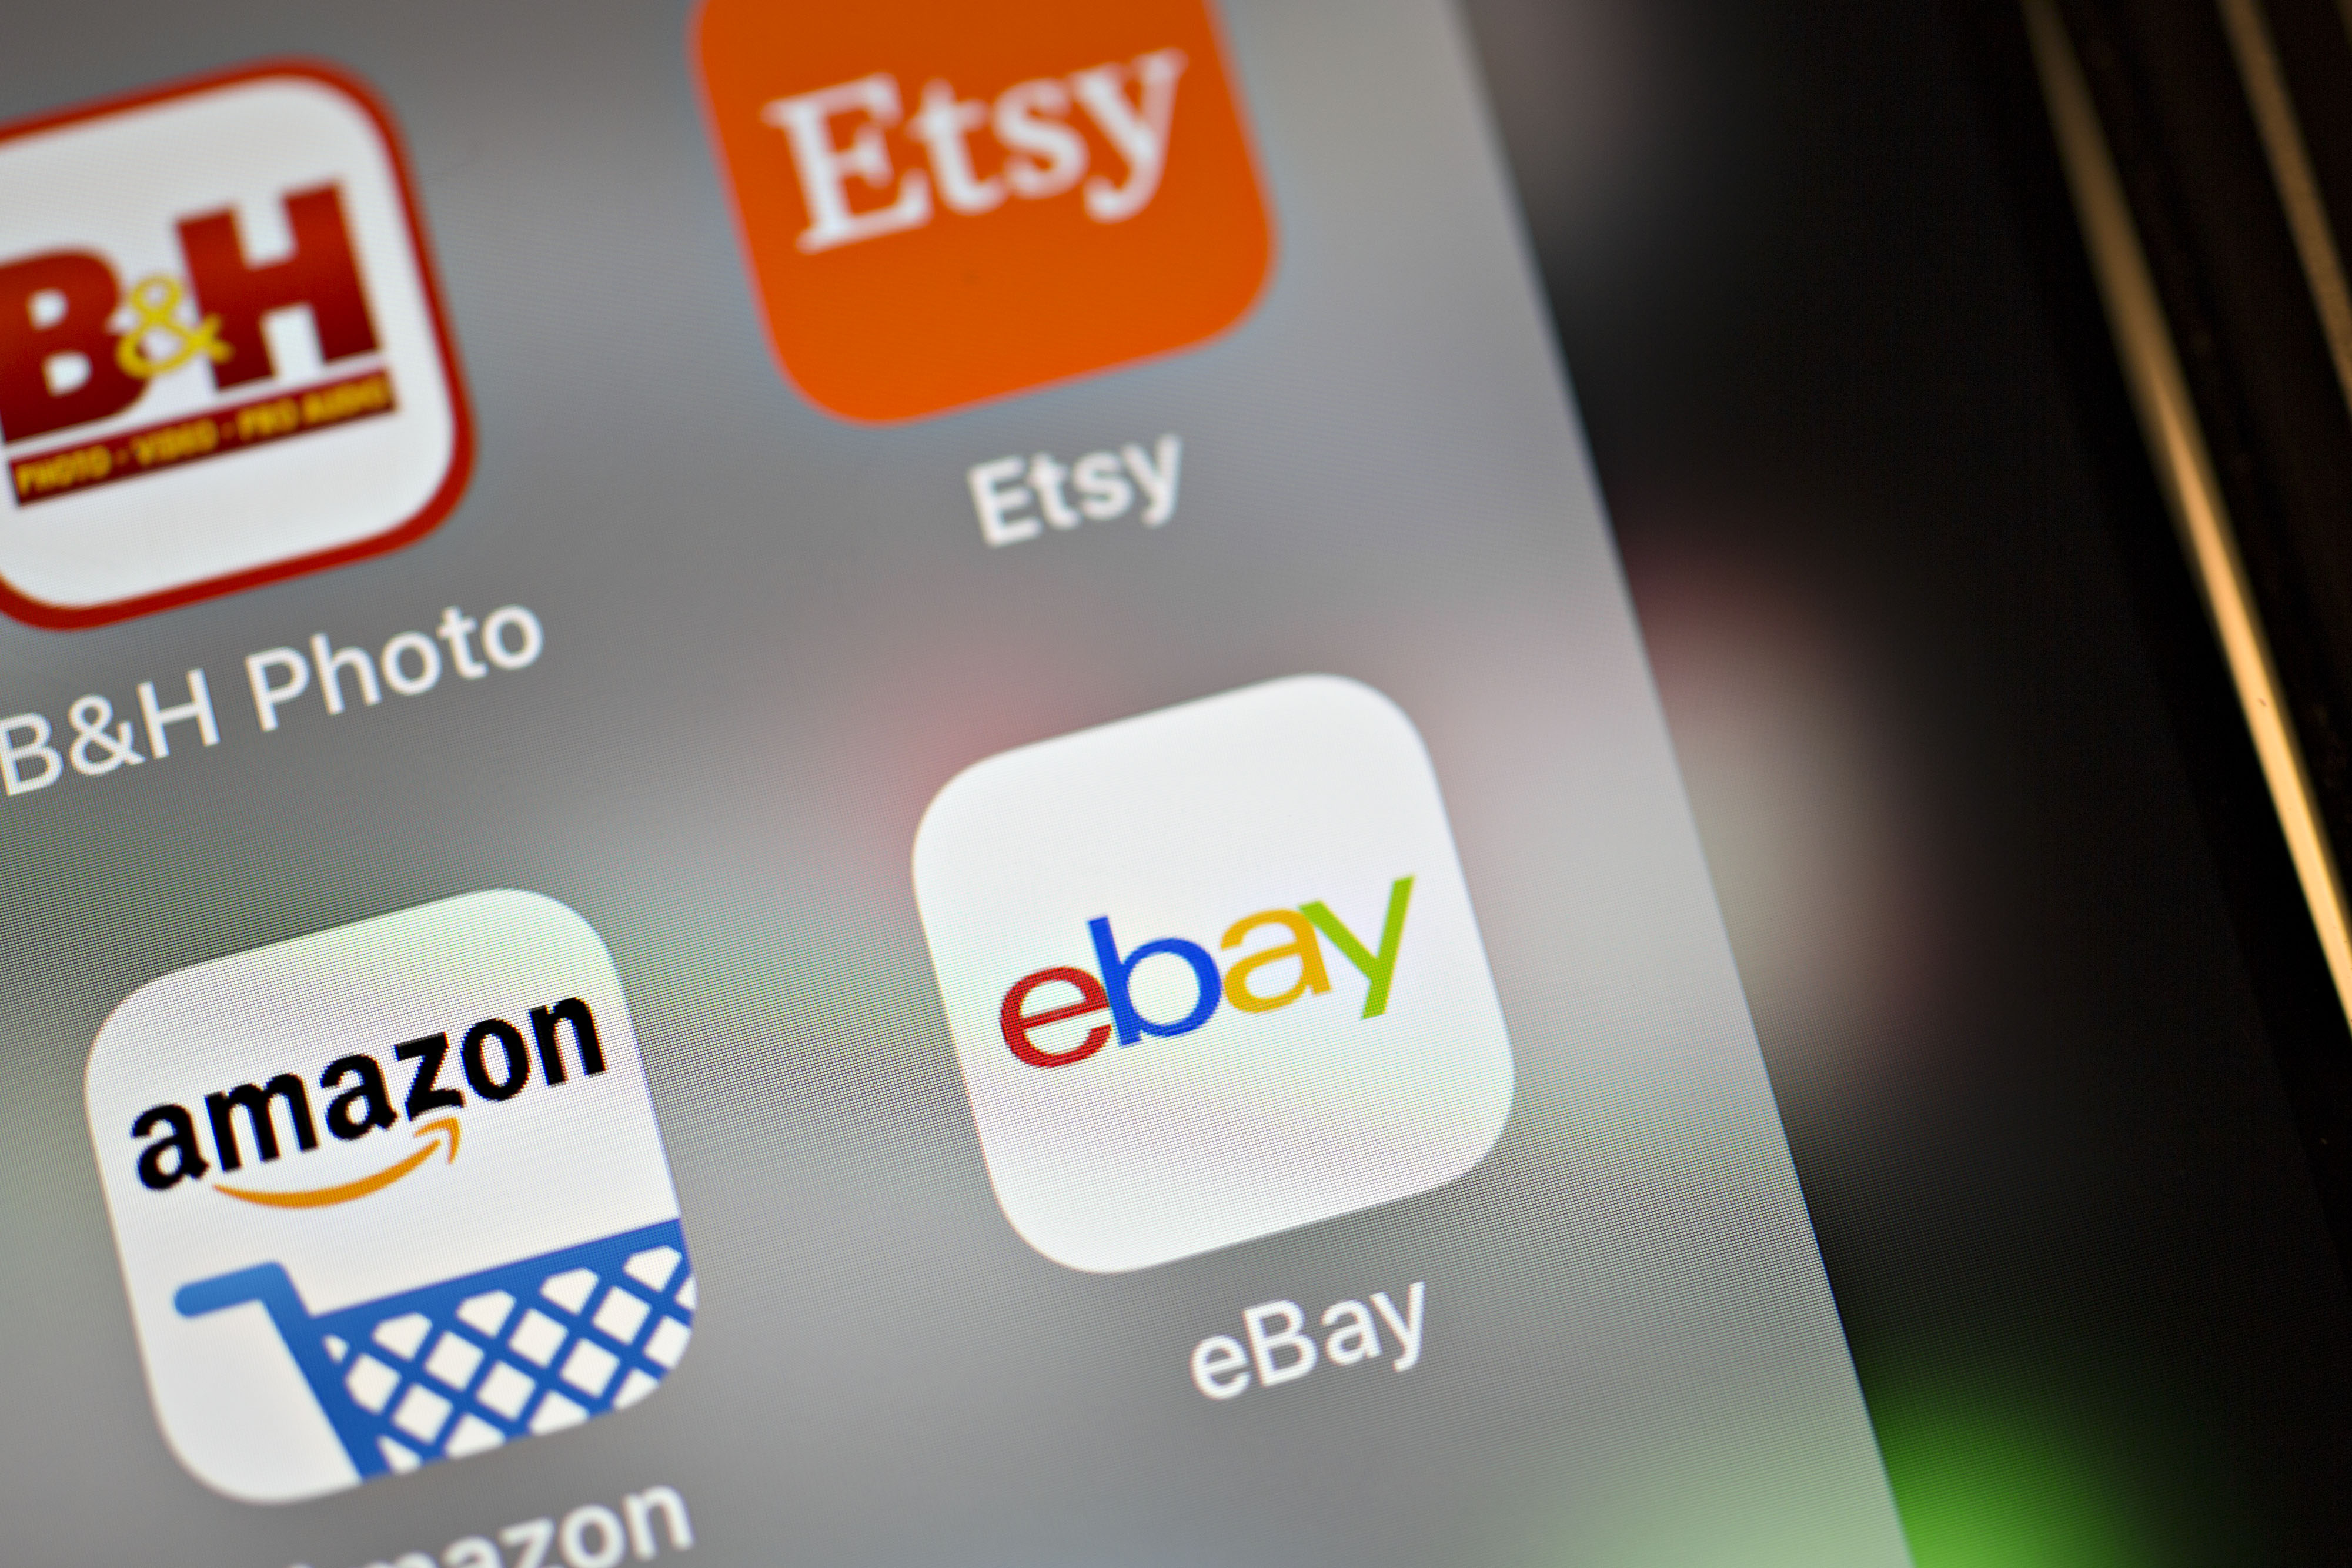 The eBay Inc. application is seen on an Apple Inc. iPhone in this arranged photograph taken in Tiskilwa, Illinois, U.S., on Monday, April 16, 2018. EBay Inc. is scheduled to release earnings figures on April 25.